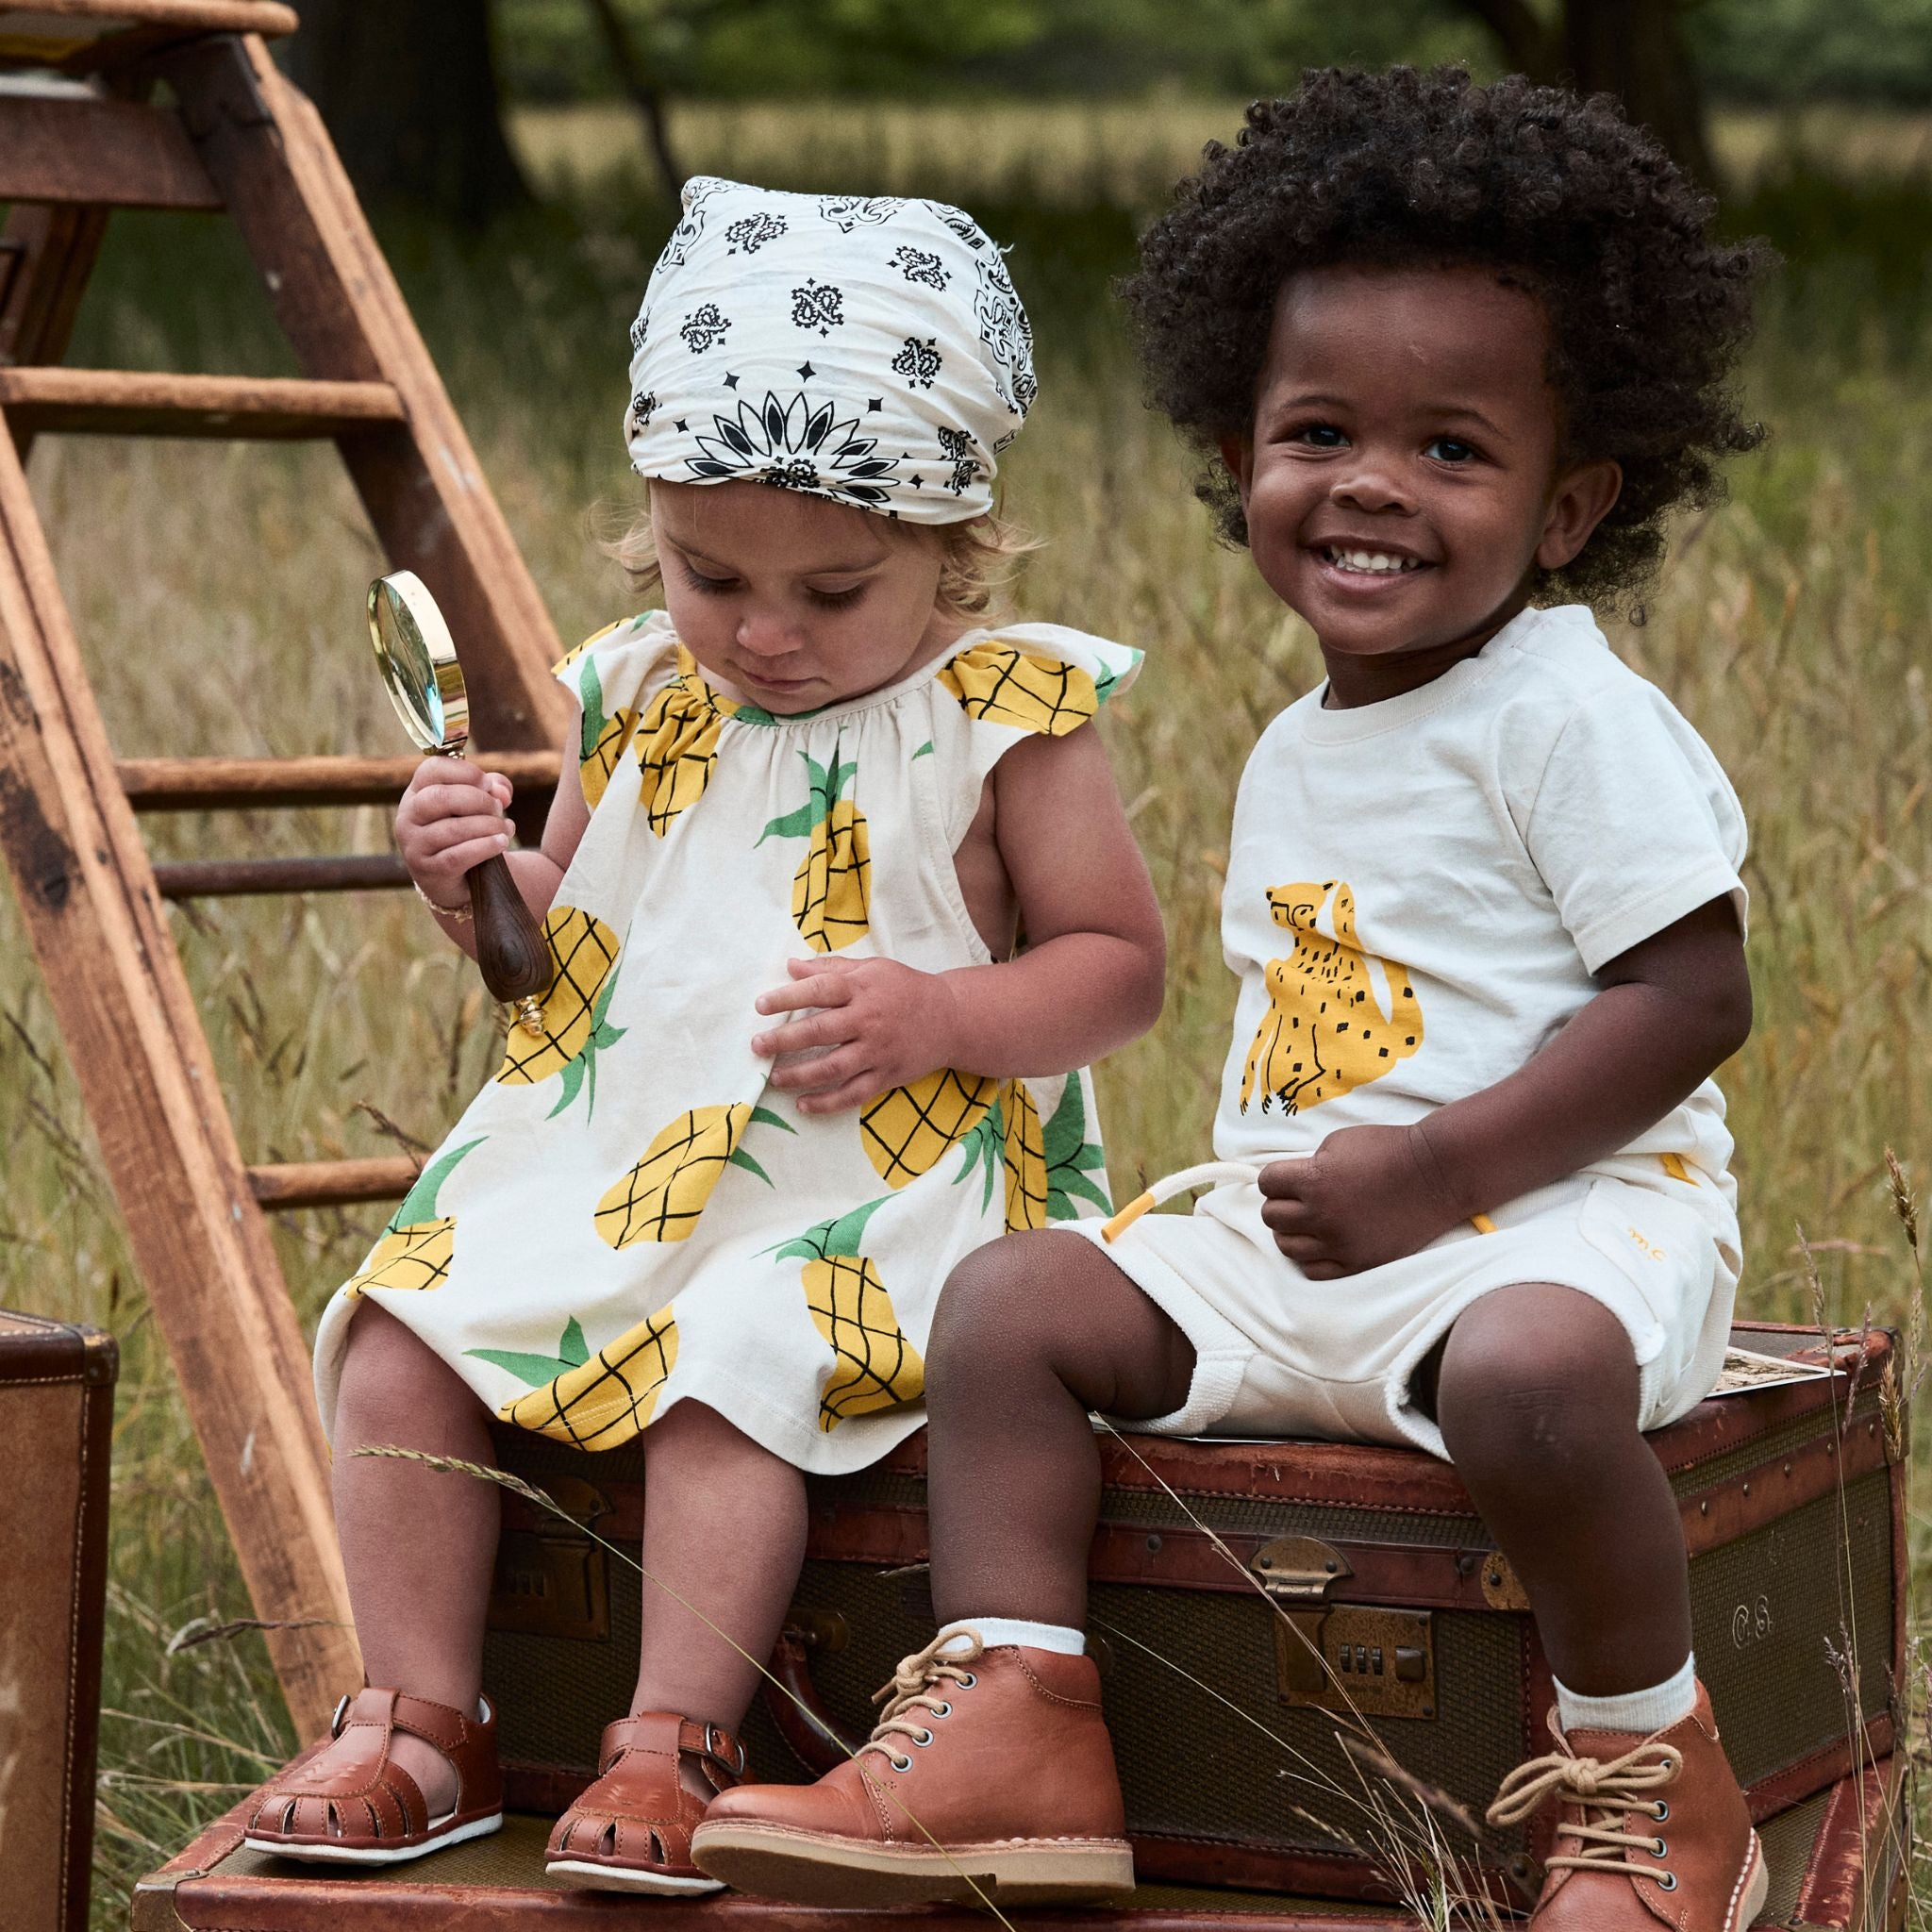 Recycled Cotton Pineapple Harvest Baby Summer Dress